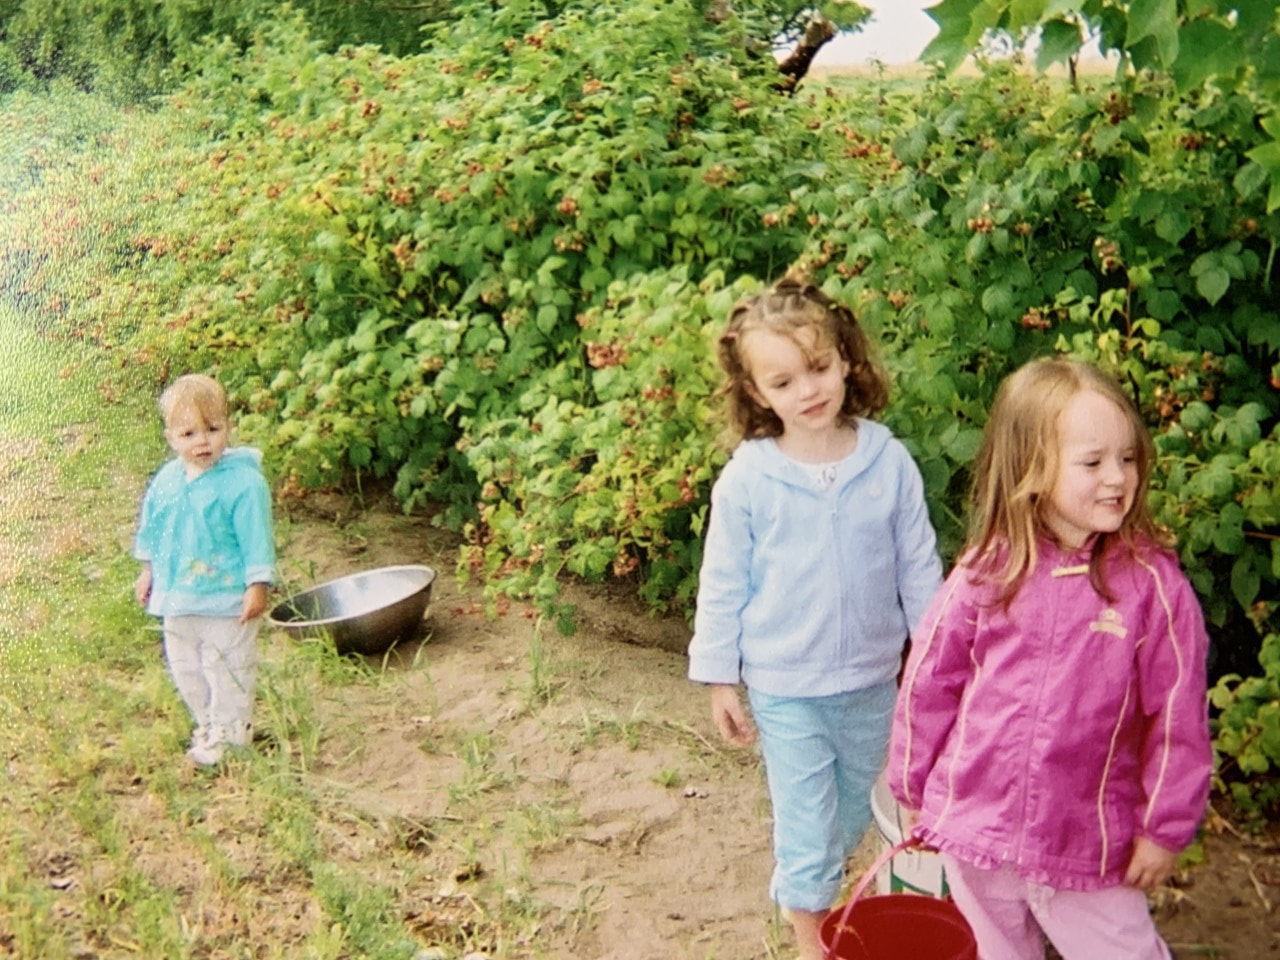 Three young girls with berry buckets walk a row of fruiting raspberries.